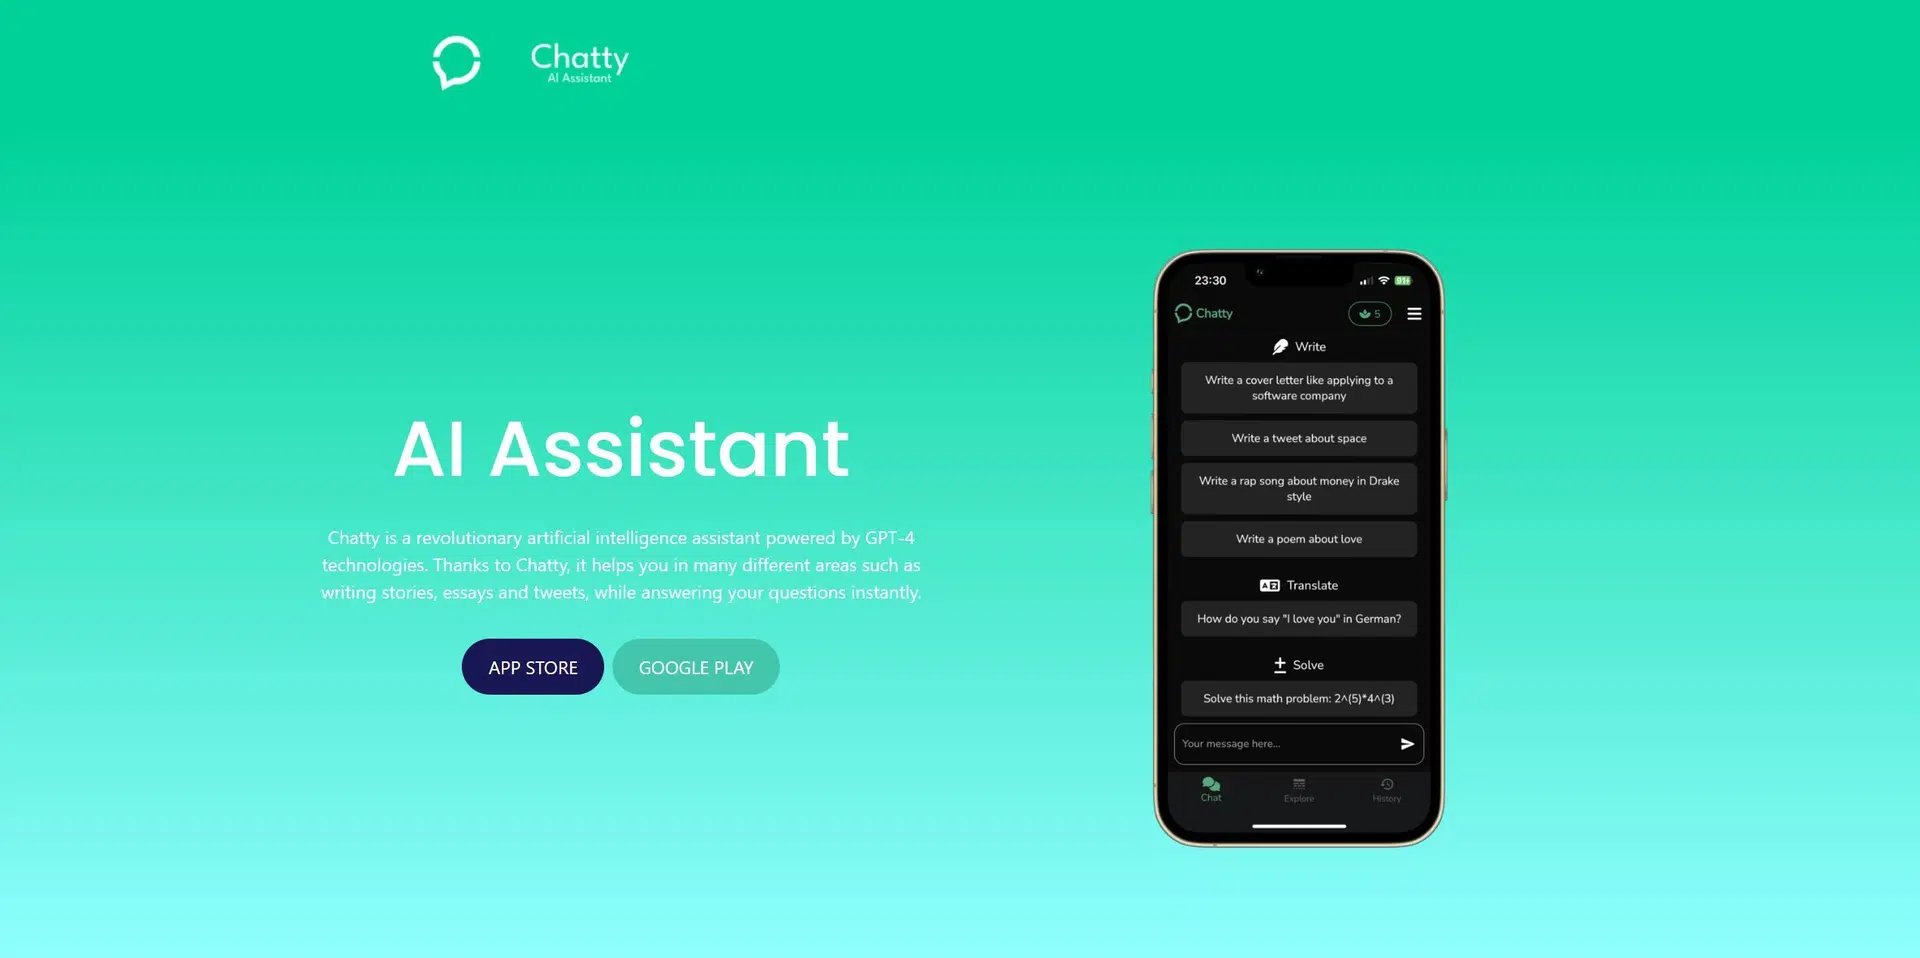 Chattywebsite picture